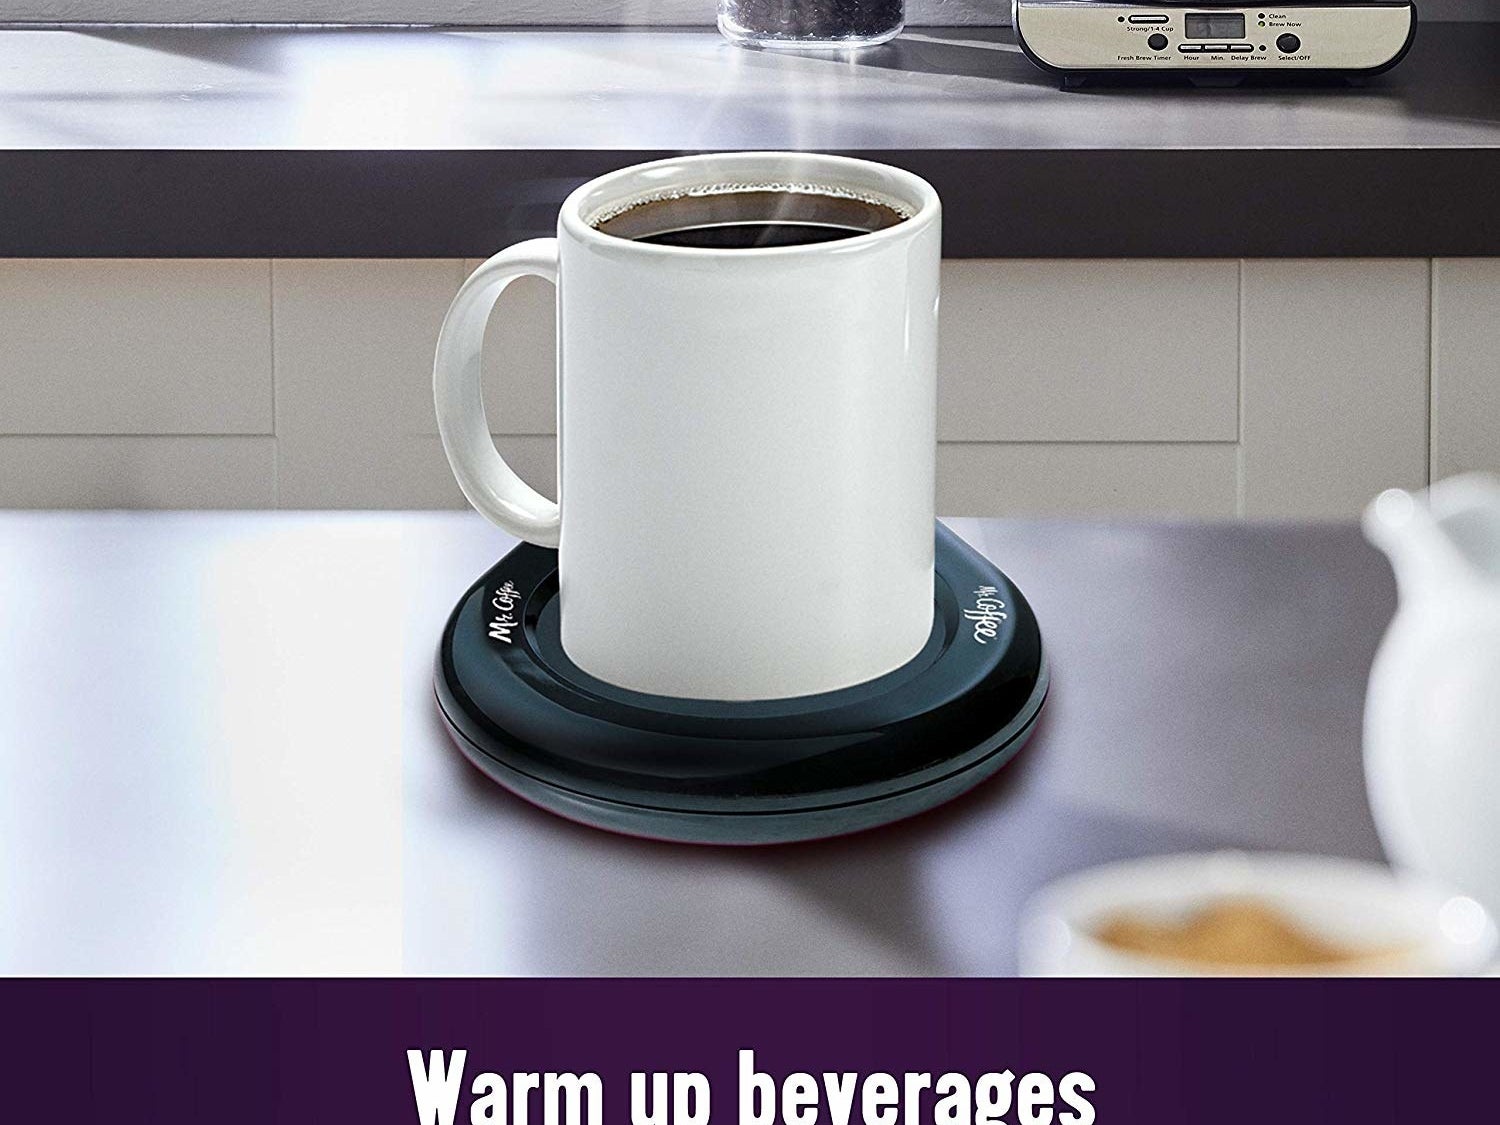 A mug filled with coffee placed on the warmer 